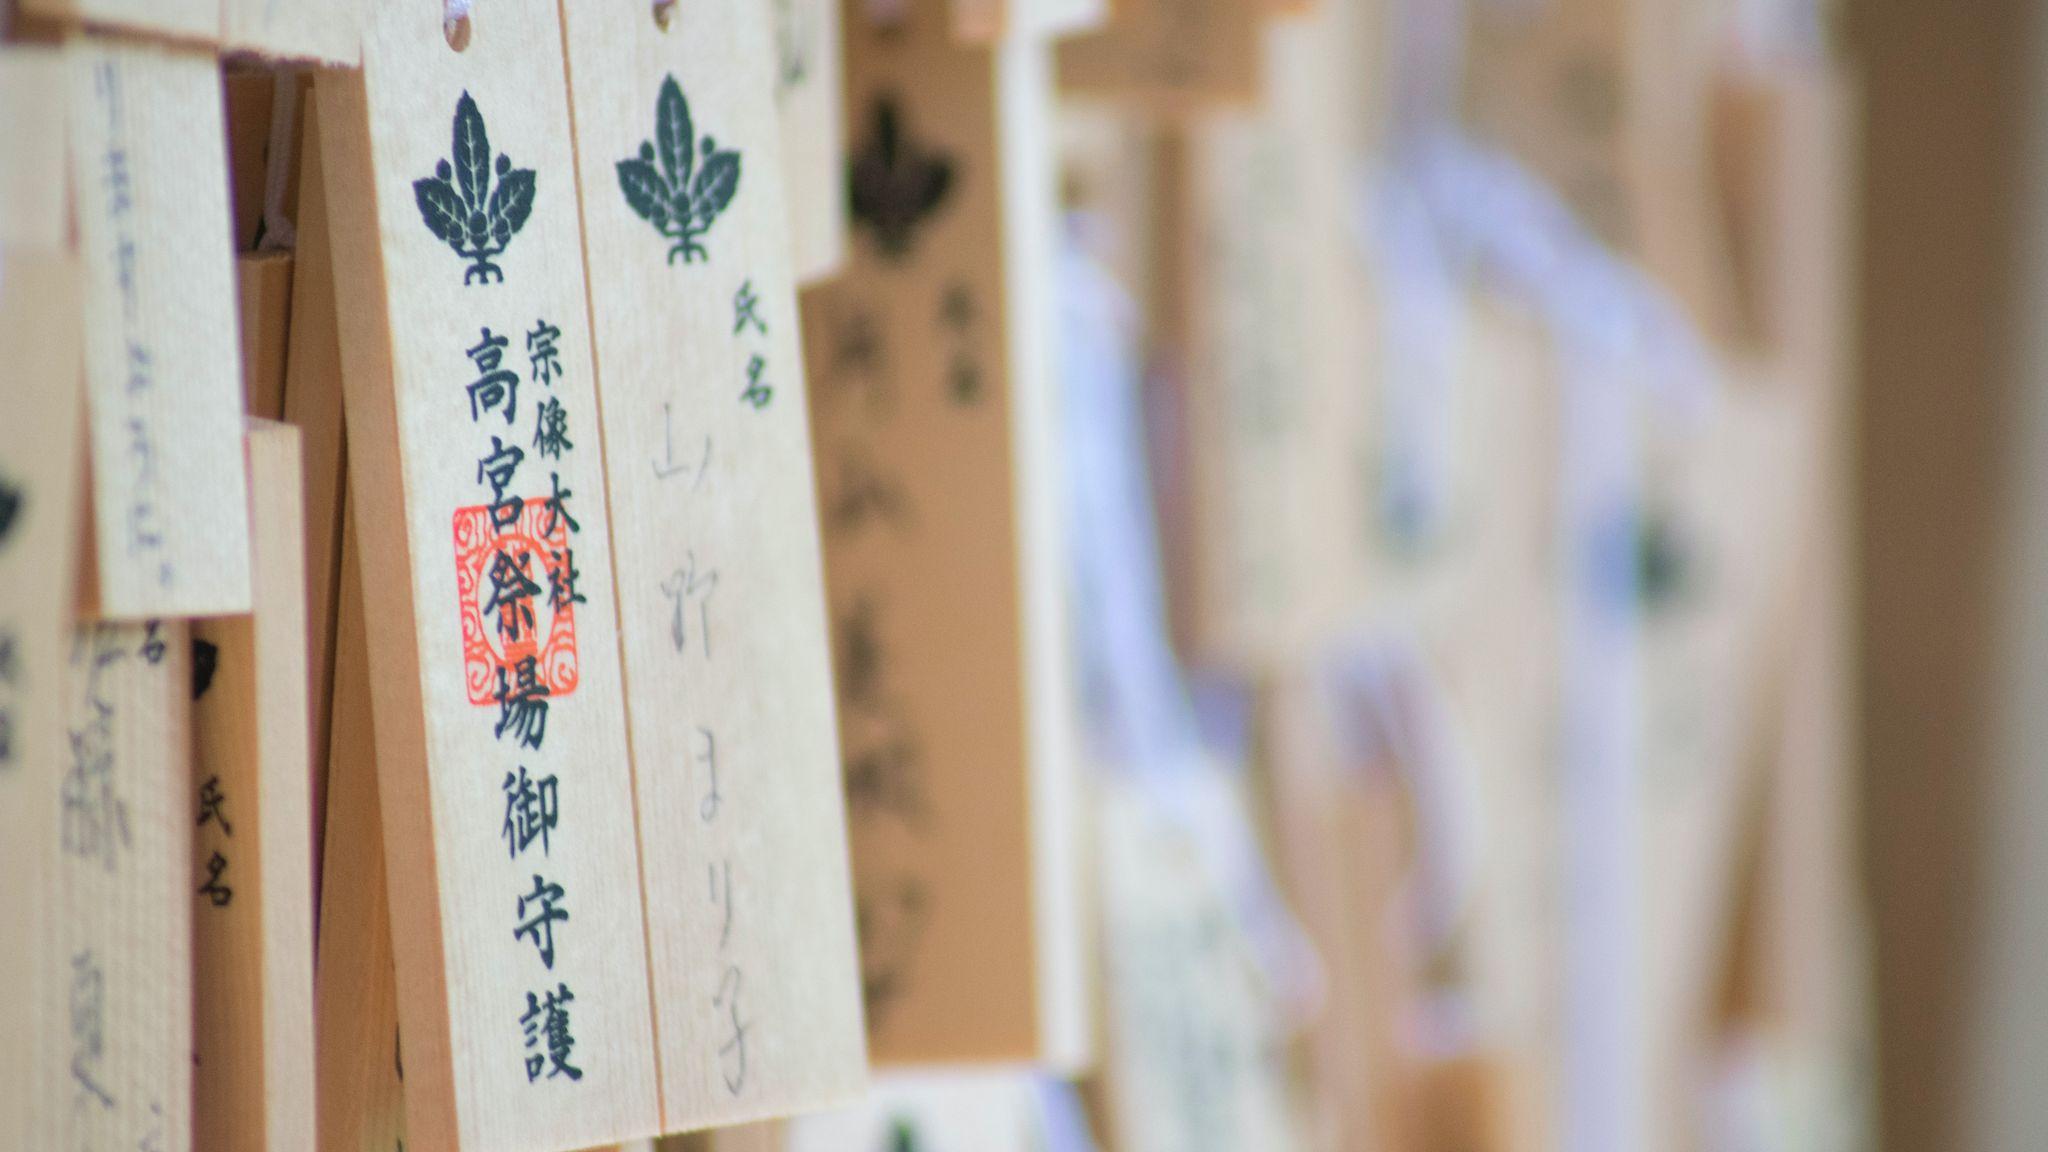 Wooden plaques at a shinto shrine - symbolic image